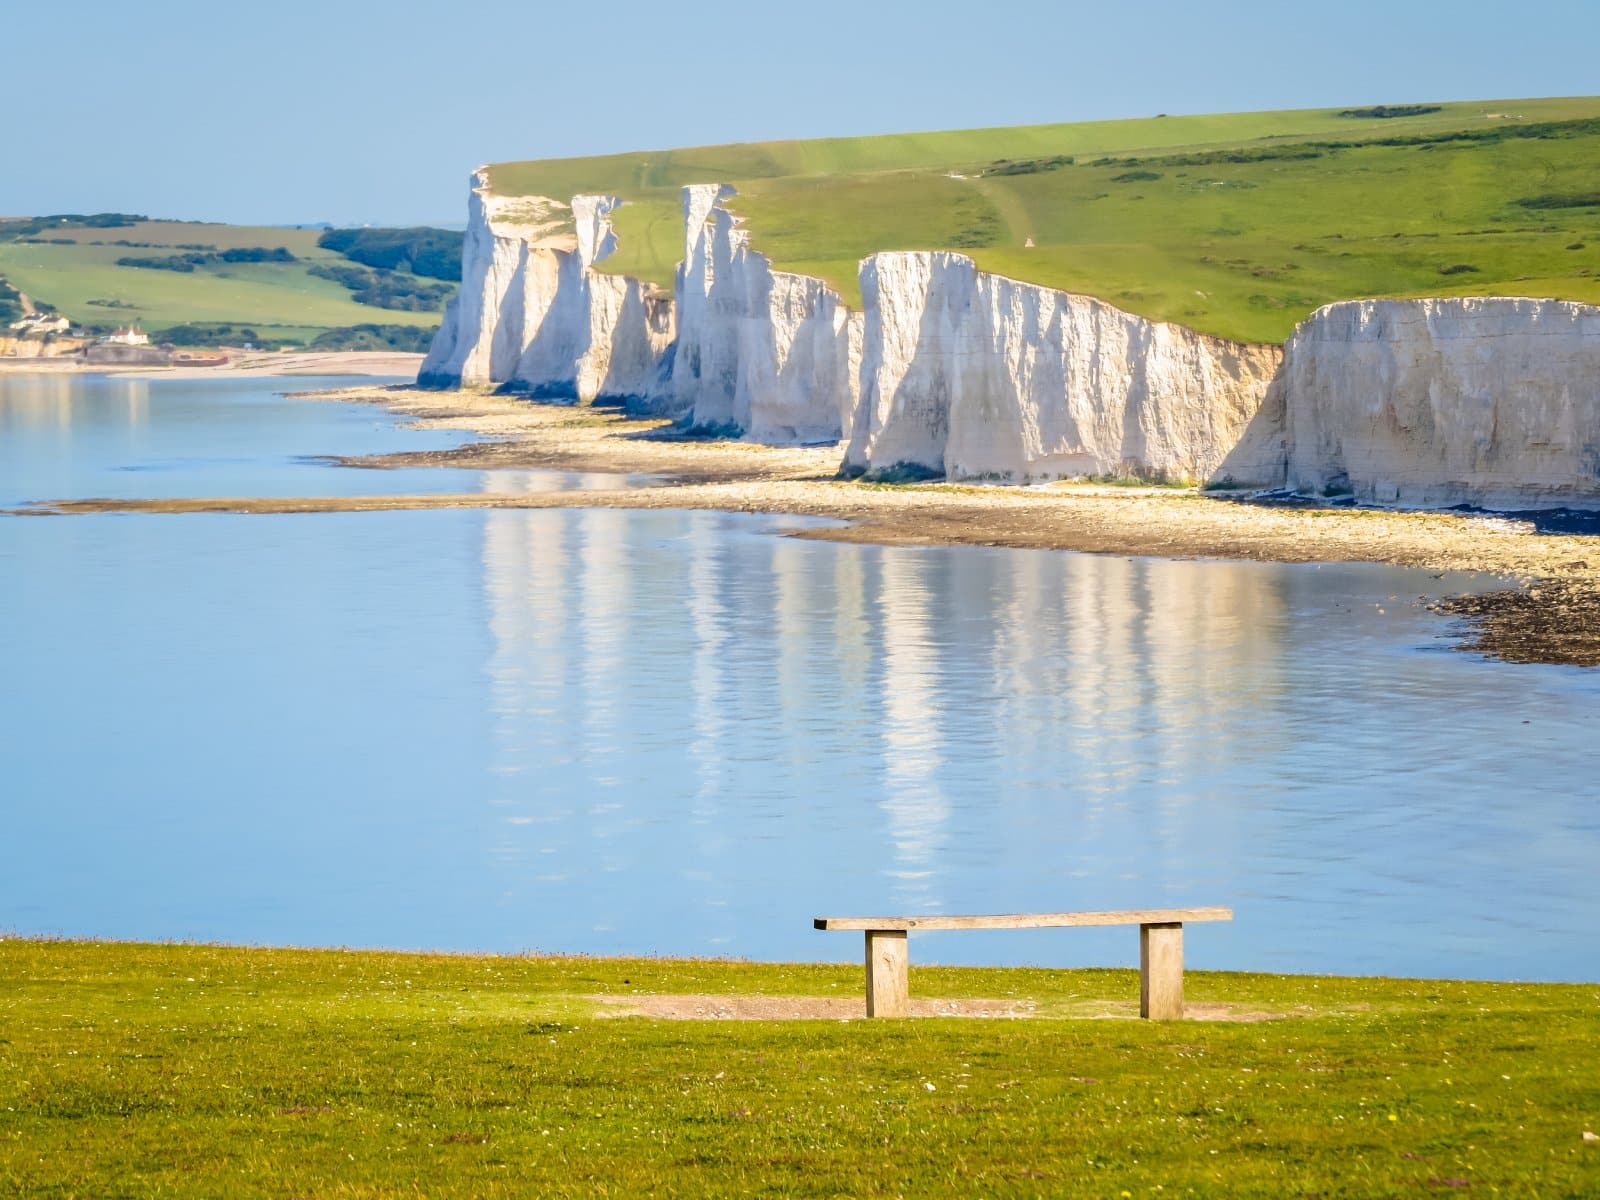 Image Credit: Shutterstock / Arndale <p>Eastbourne claims the title of the UK’s sunniest city, a fact that its Victorian waterfront and bustling pier wear proudly. It’s a slice of sunny bliss on the south coast.</p>